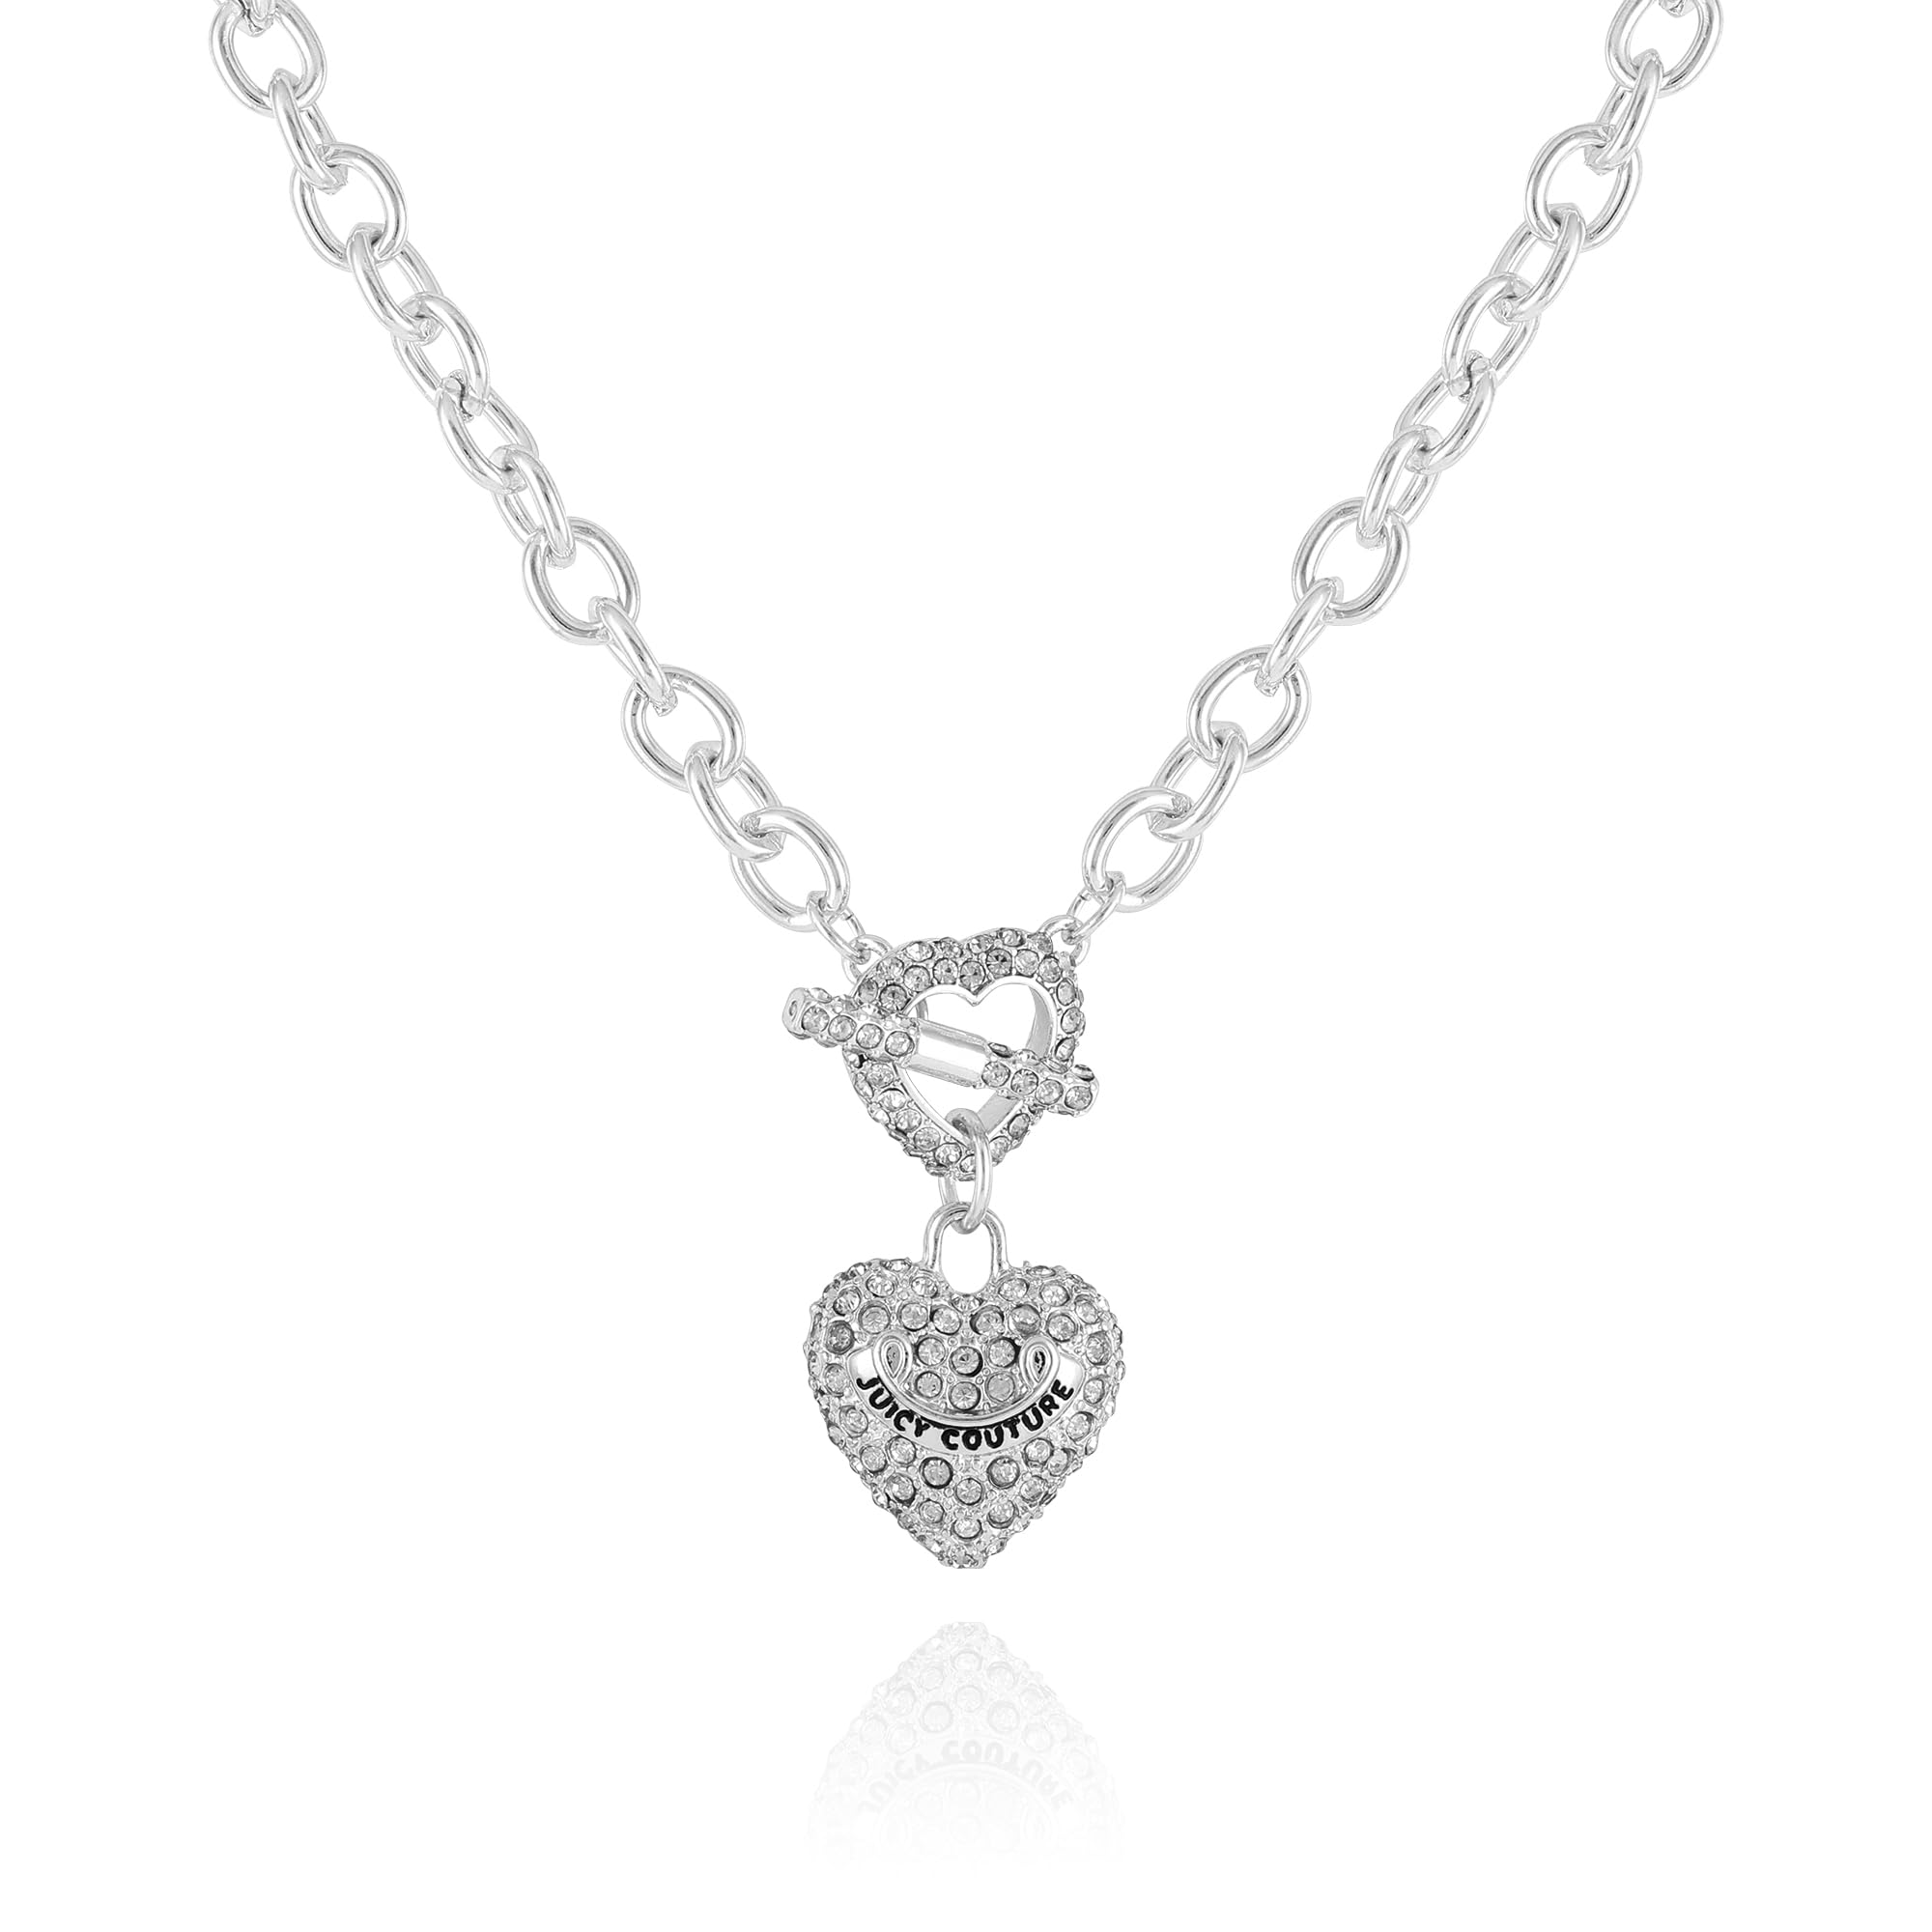 Juicy Couture Goldtone Heart Charm Pendant Necklace For Women